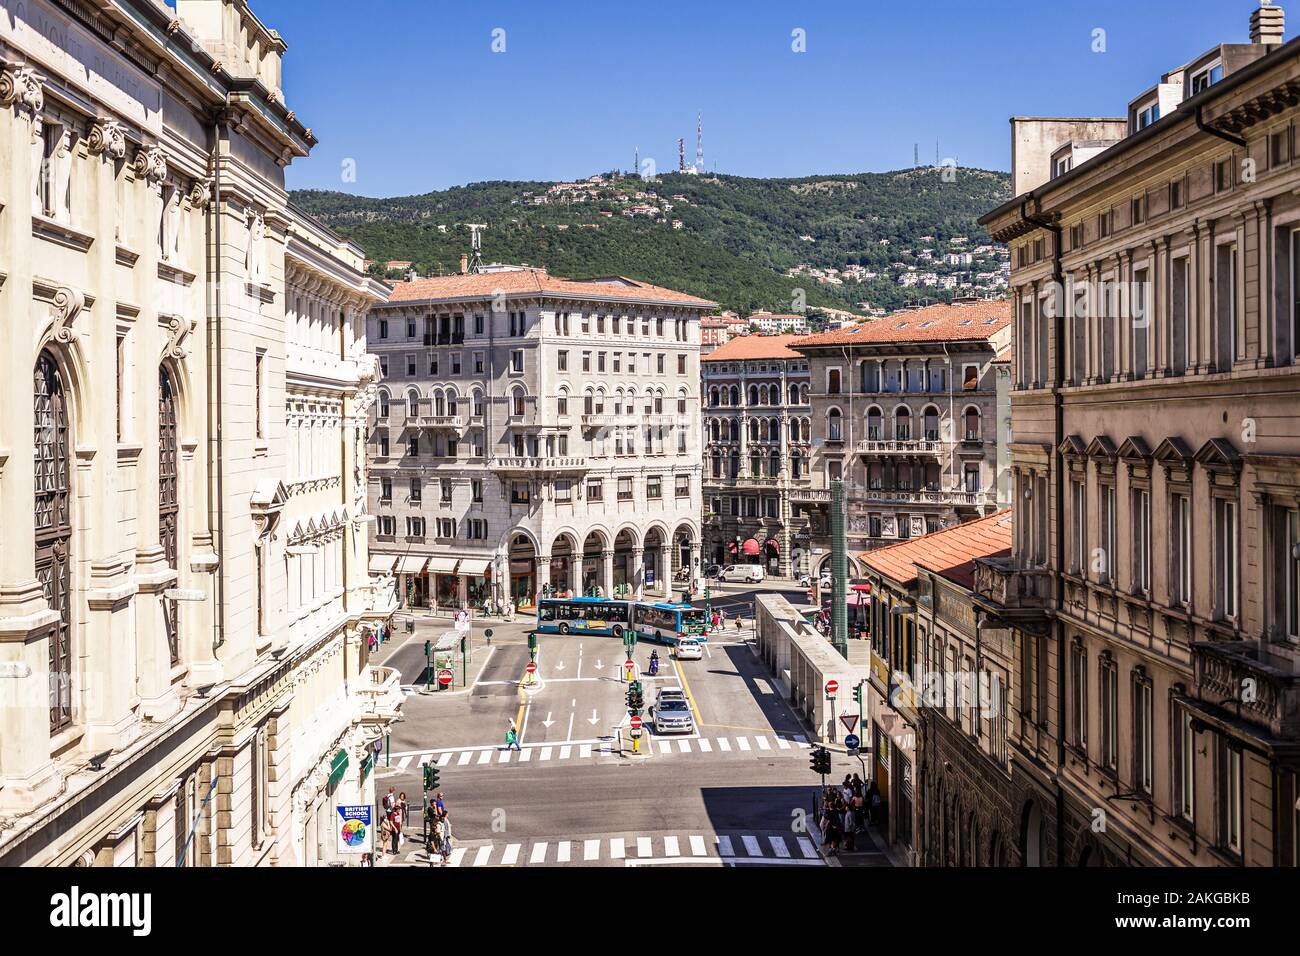 View of the piazza carlo goldoni in trieste, italy, from the scala dei giganti. Skyline, theater and university visible. Stock Photo